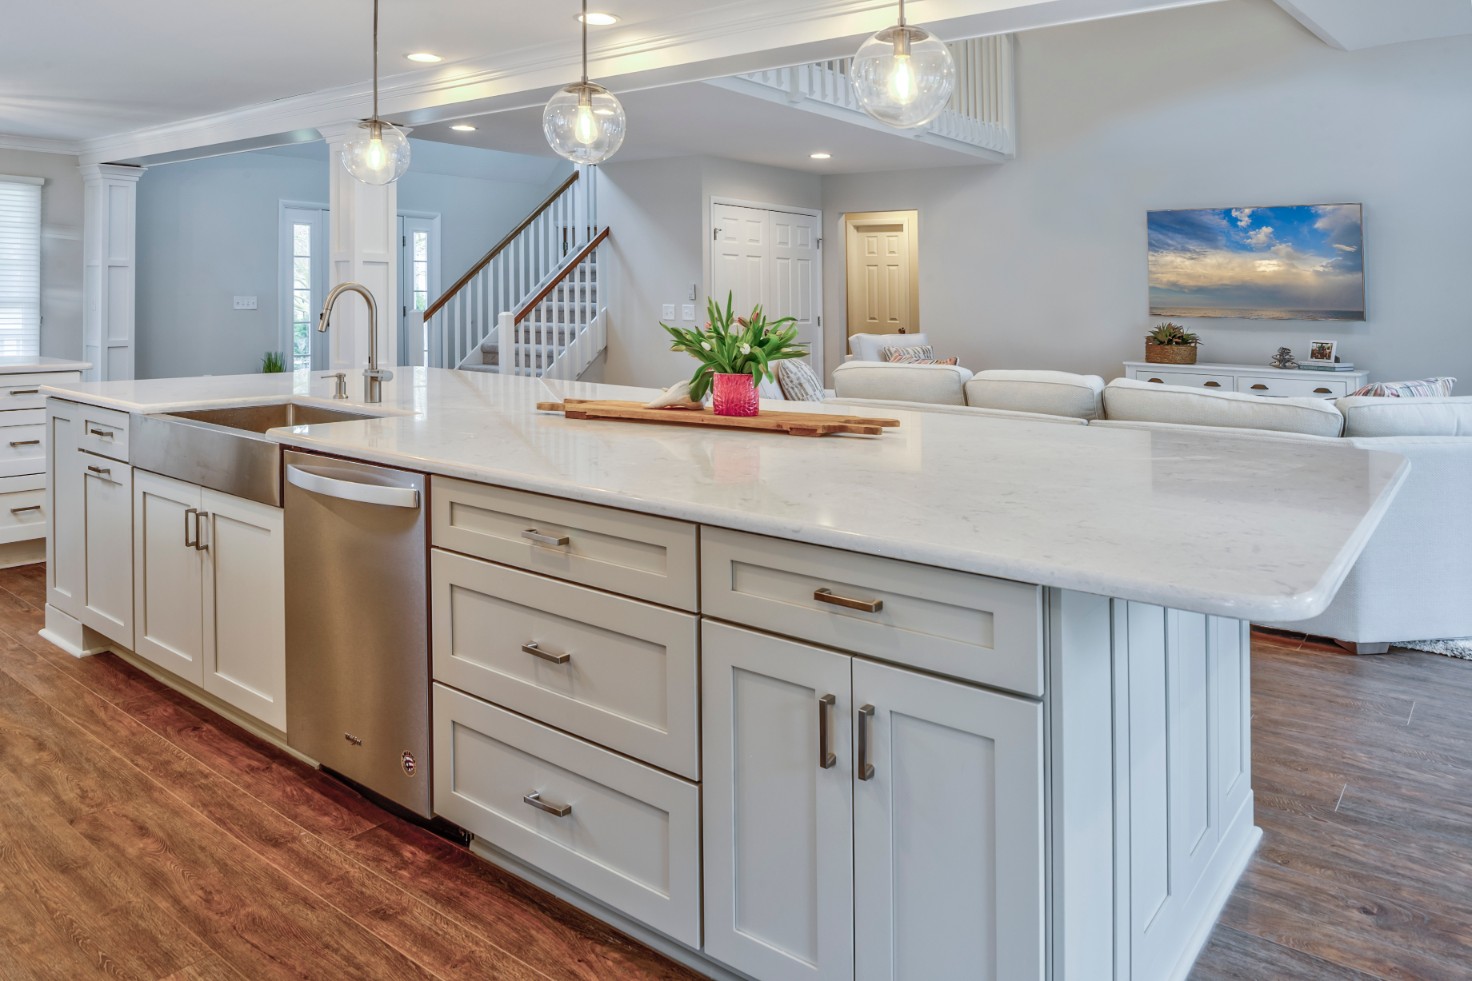 Canal Way Kitchen Remodel in Bethany Beach DE - Kitchen Island with Brushed Stainless Steel Farm Sink